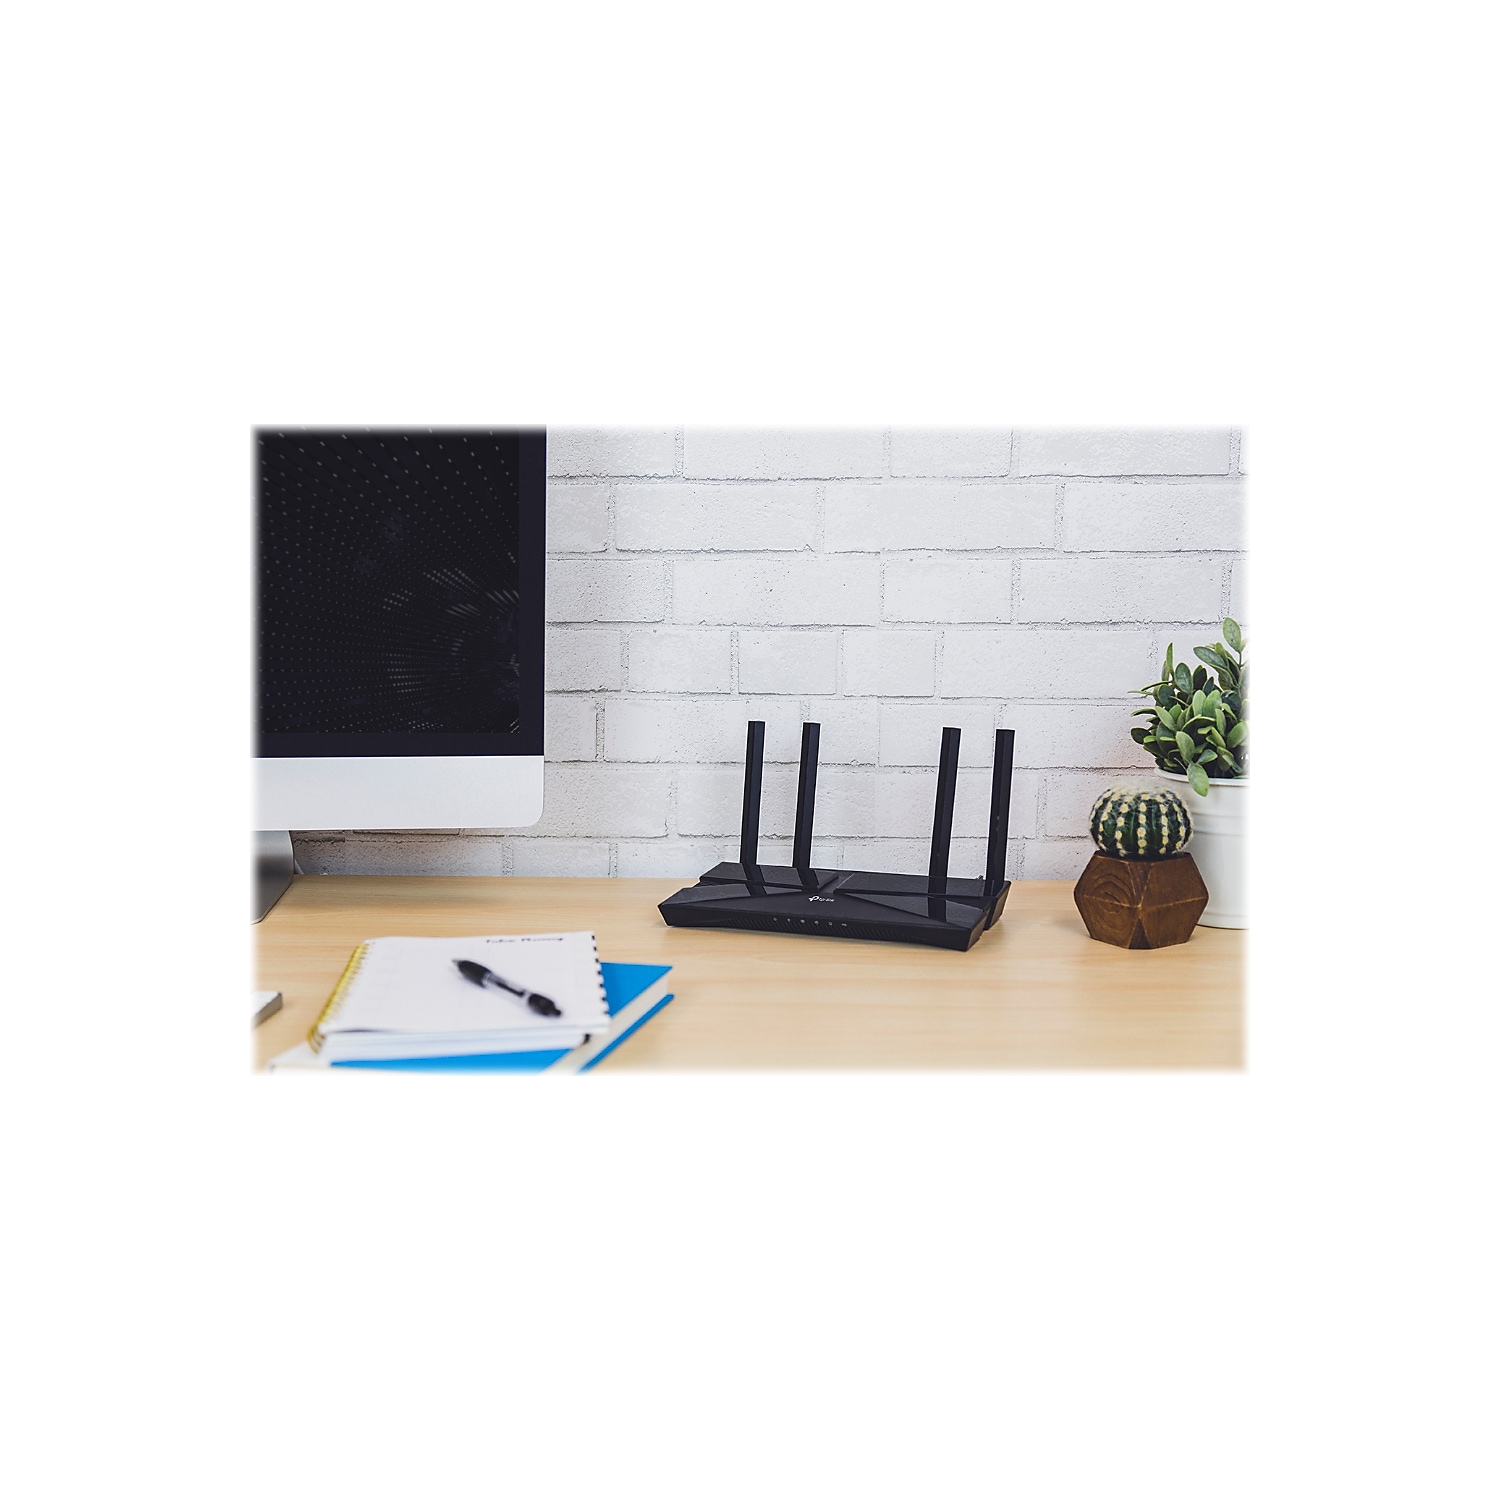 TP-Link Archer AX1500 WiFi 6 Dual-Band Wireless Router | up to 1.5 Gbps Speeds - image 4 of 7